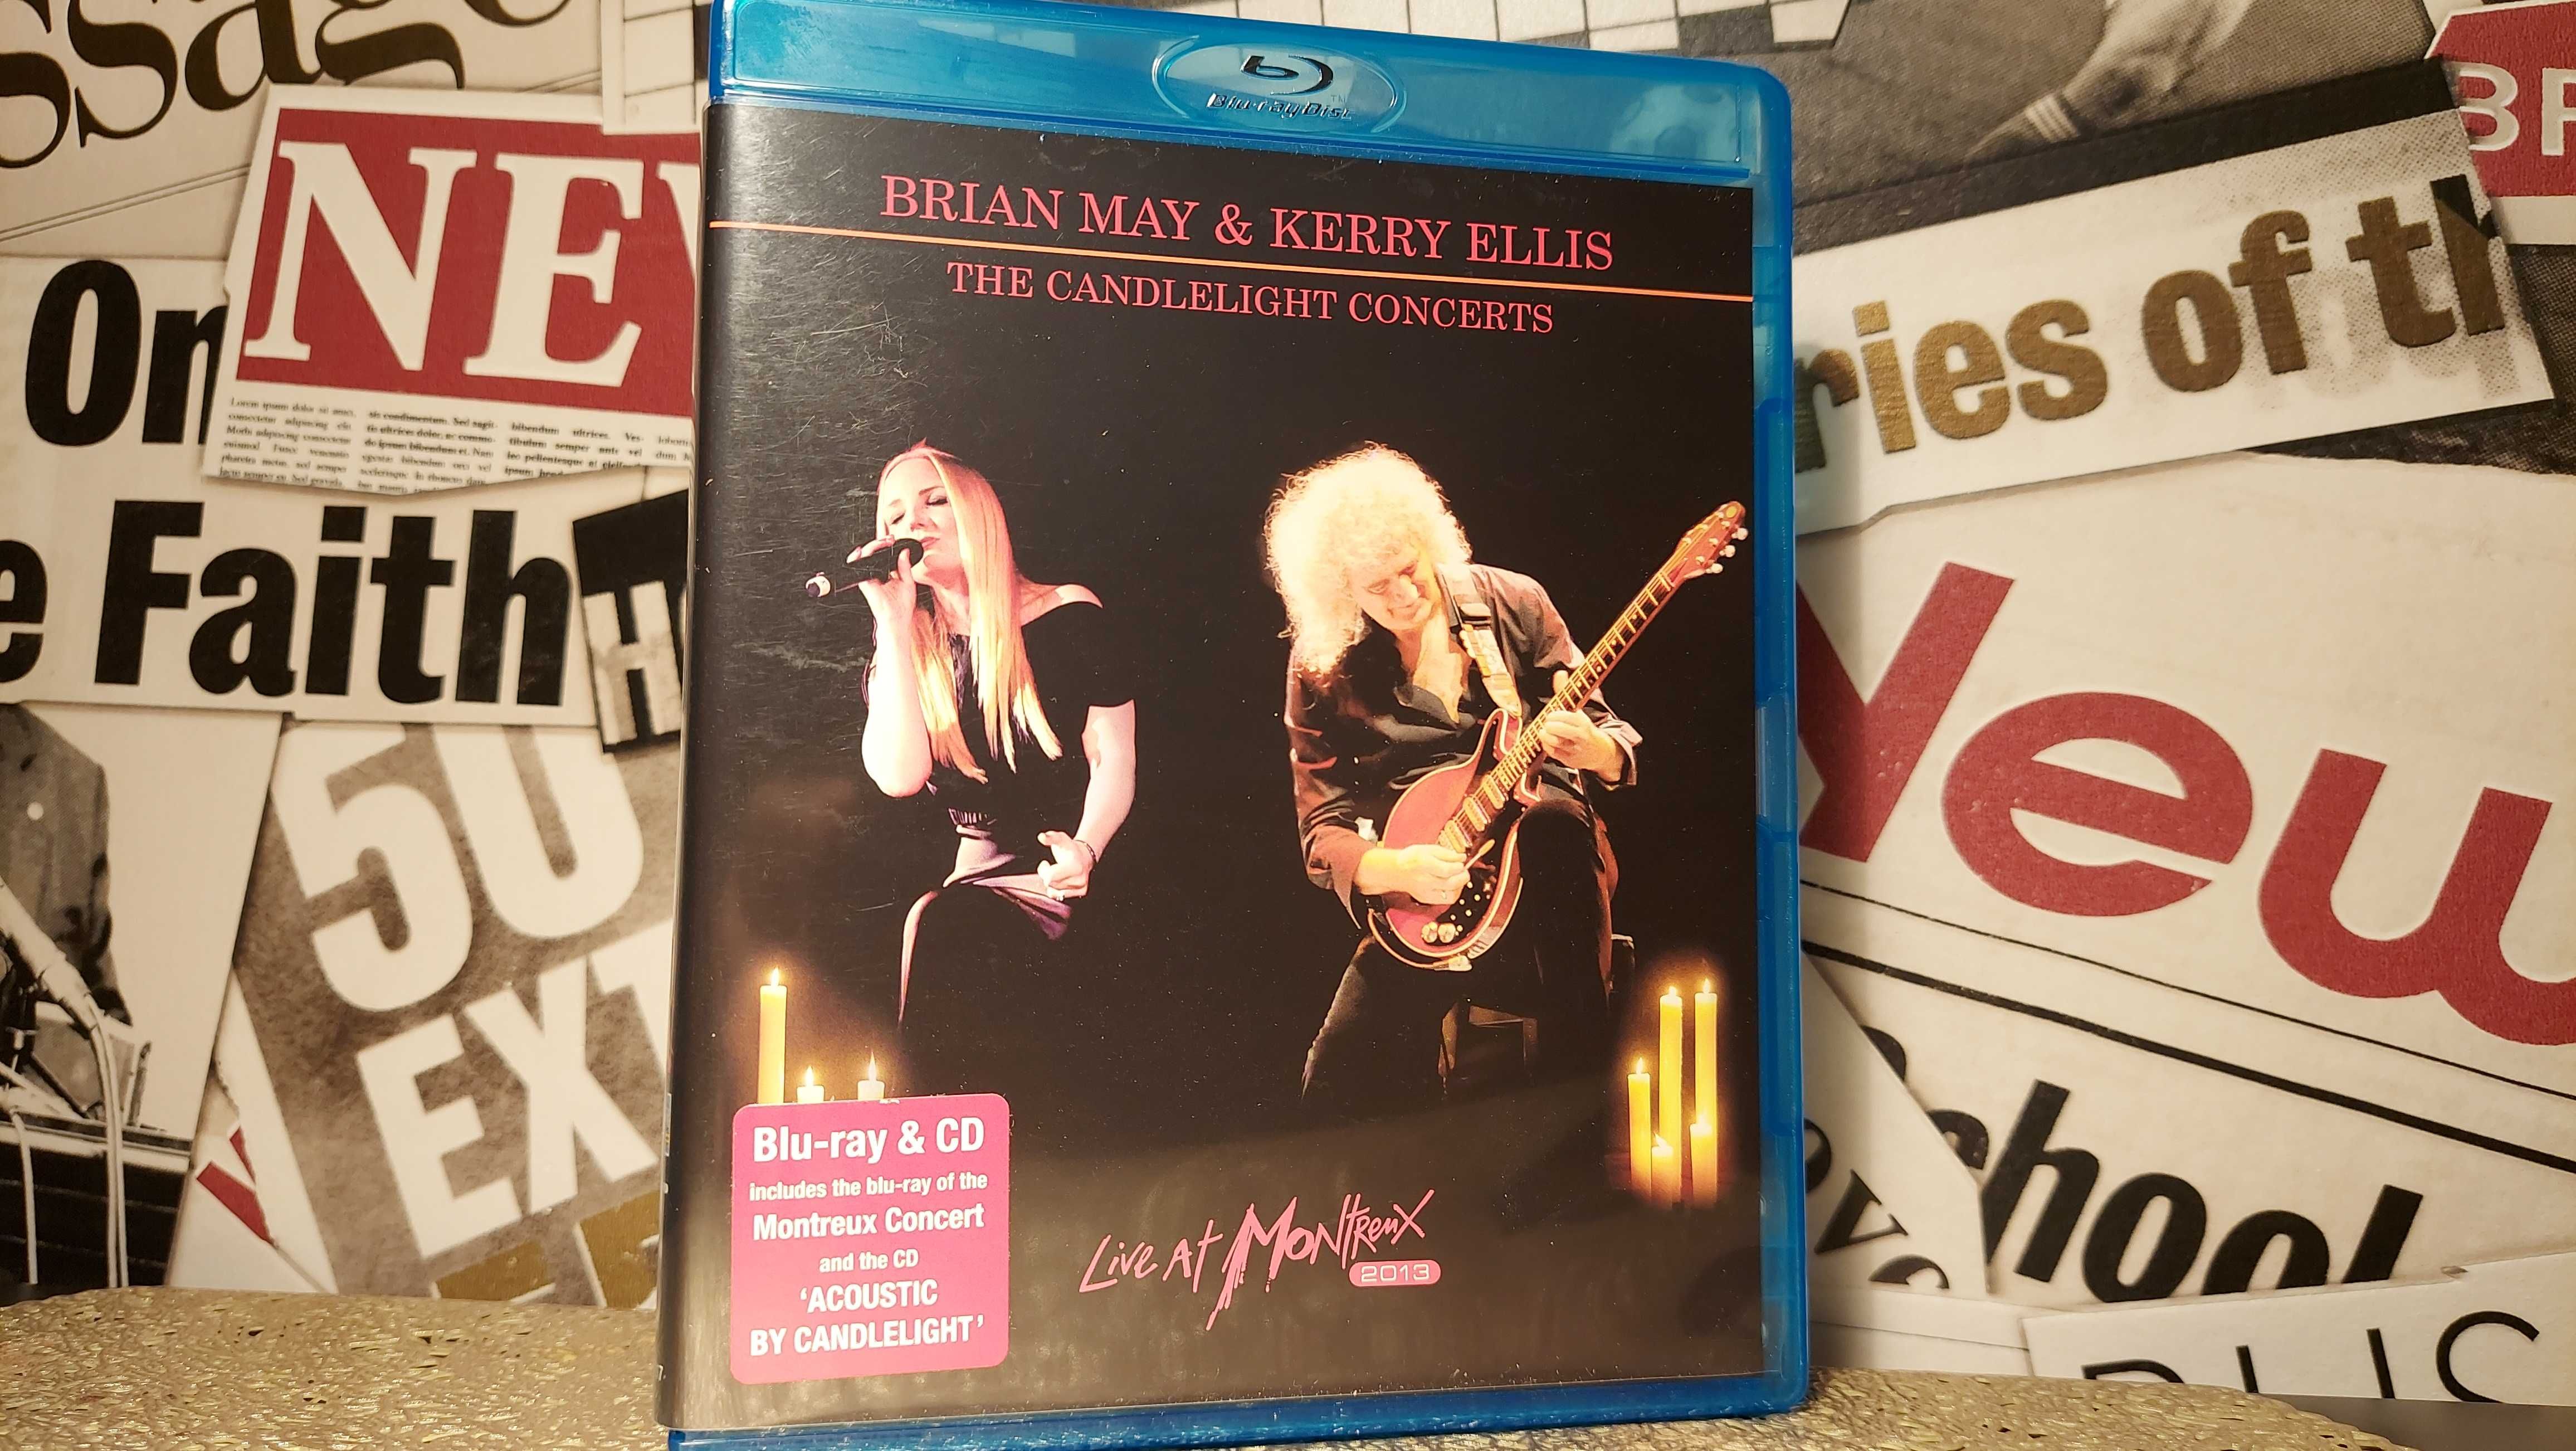 Brian May & Kerry Ellis - The Candlelight Concerts Blu-ray + CD